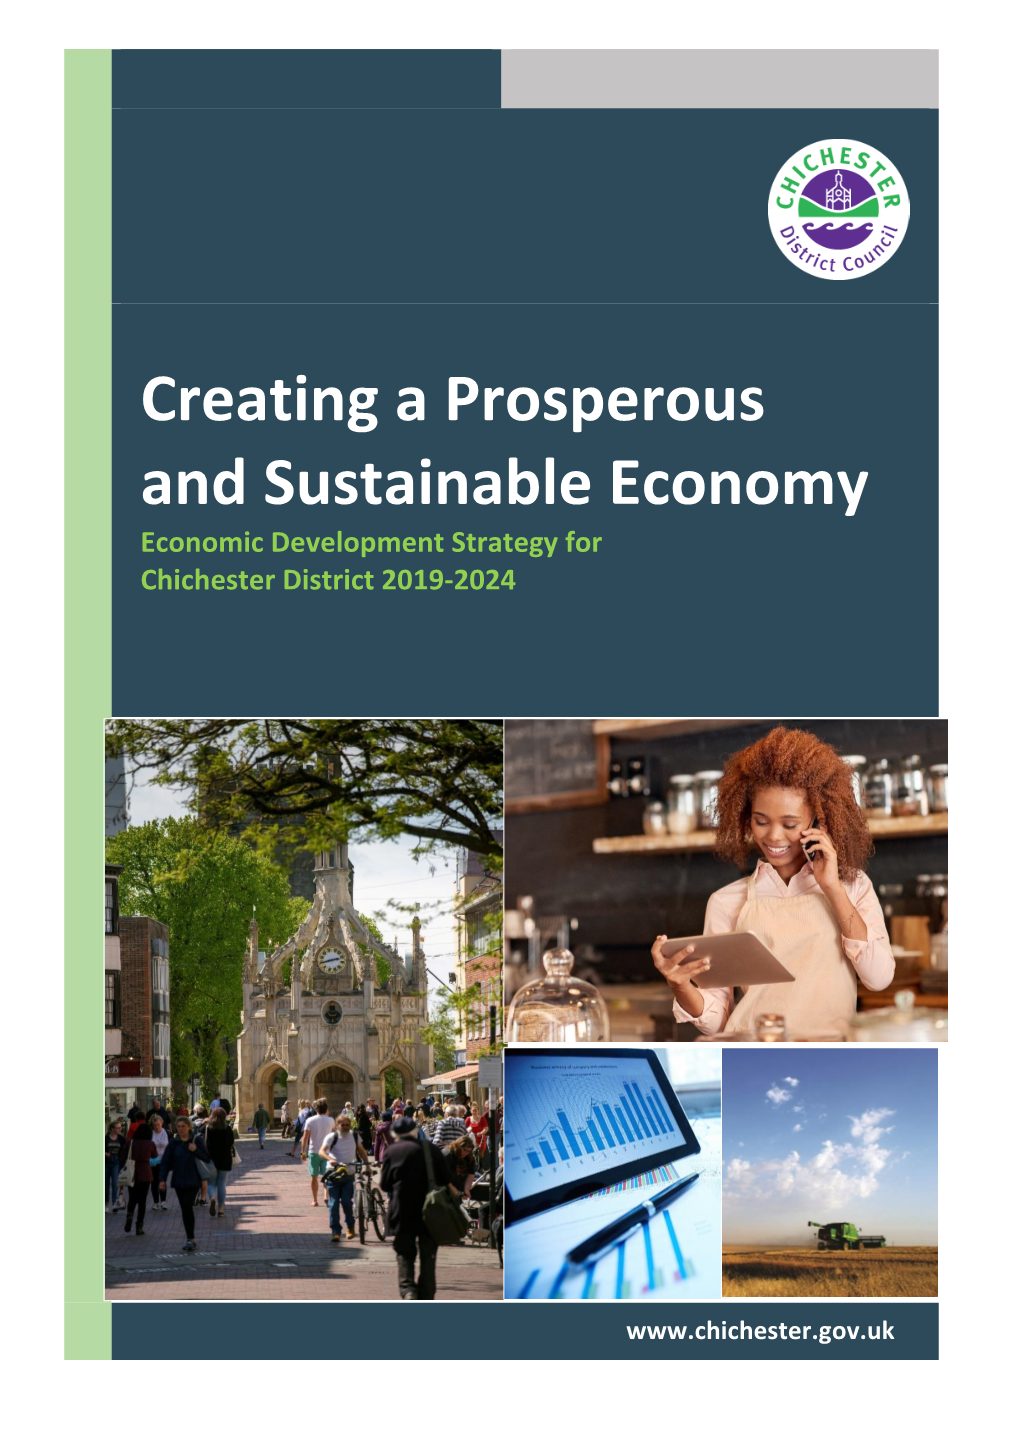 Creating a Prosperous and Sustainable Economy Economic Development Strategy for Chichester District 2019-2024